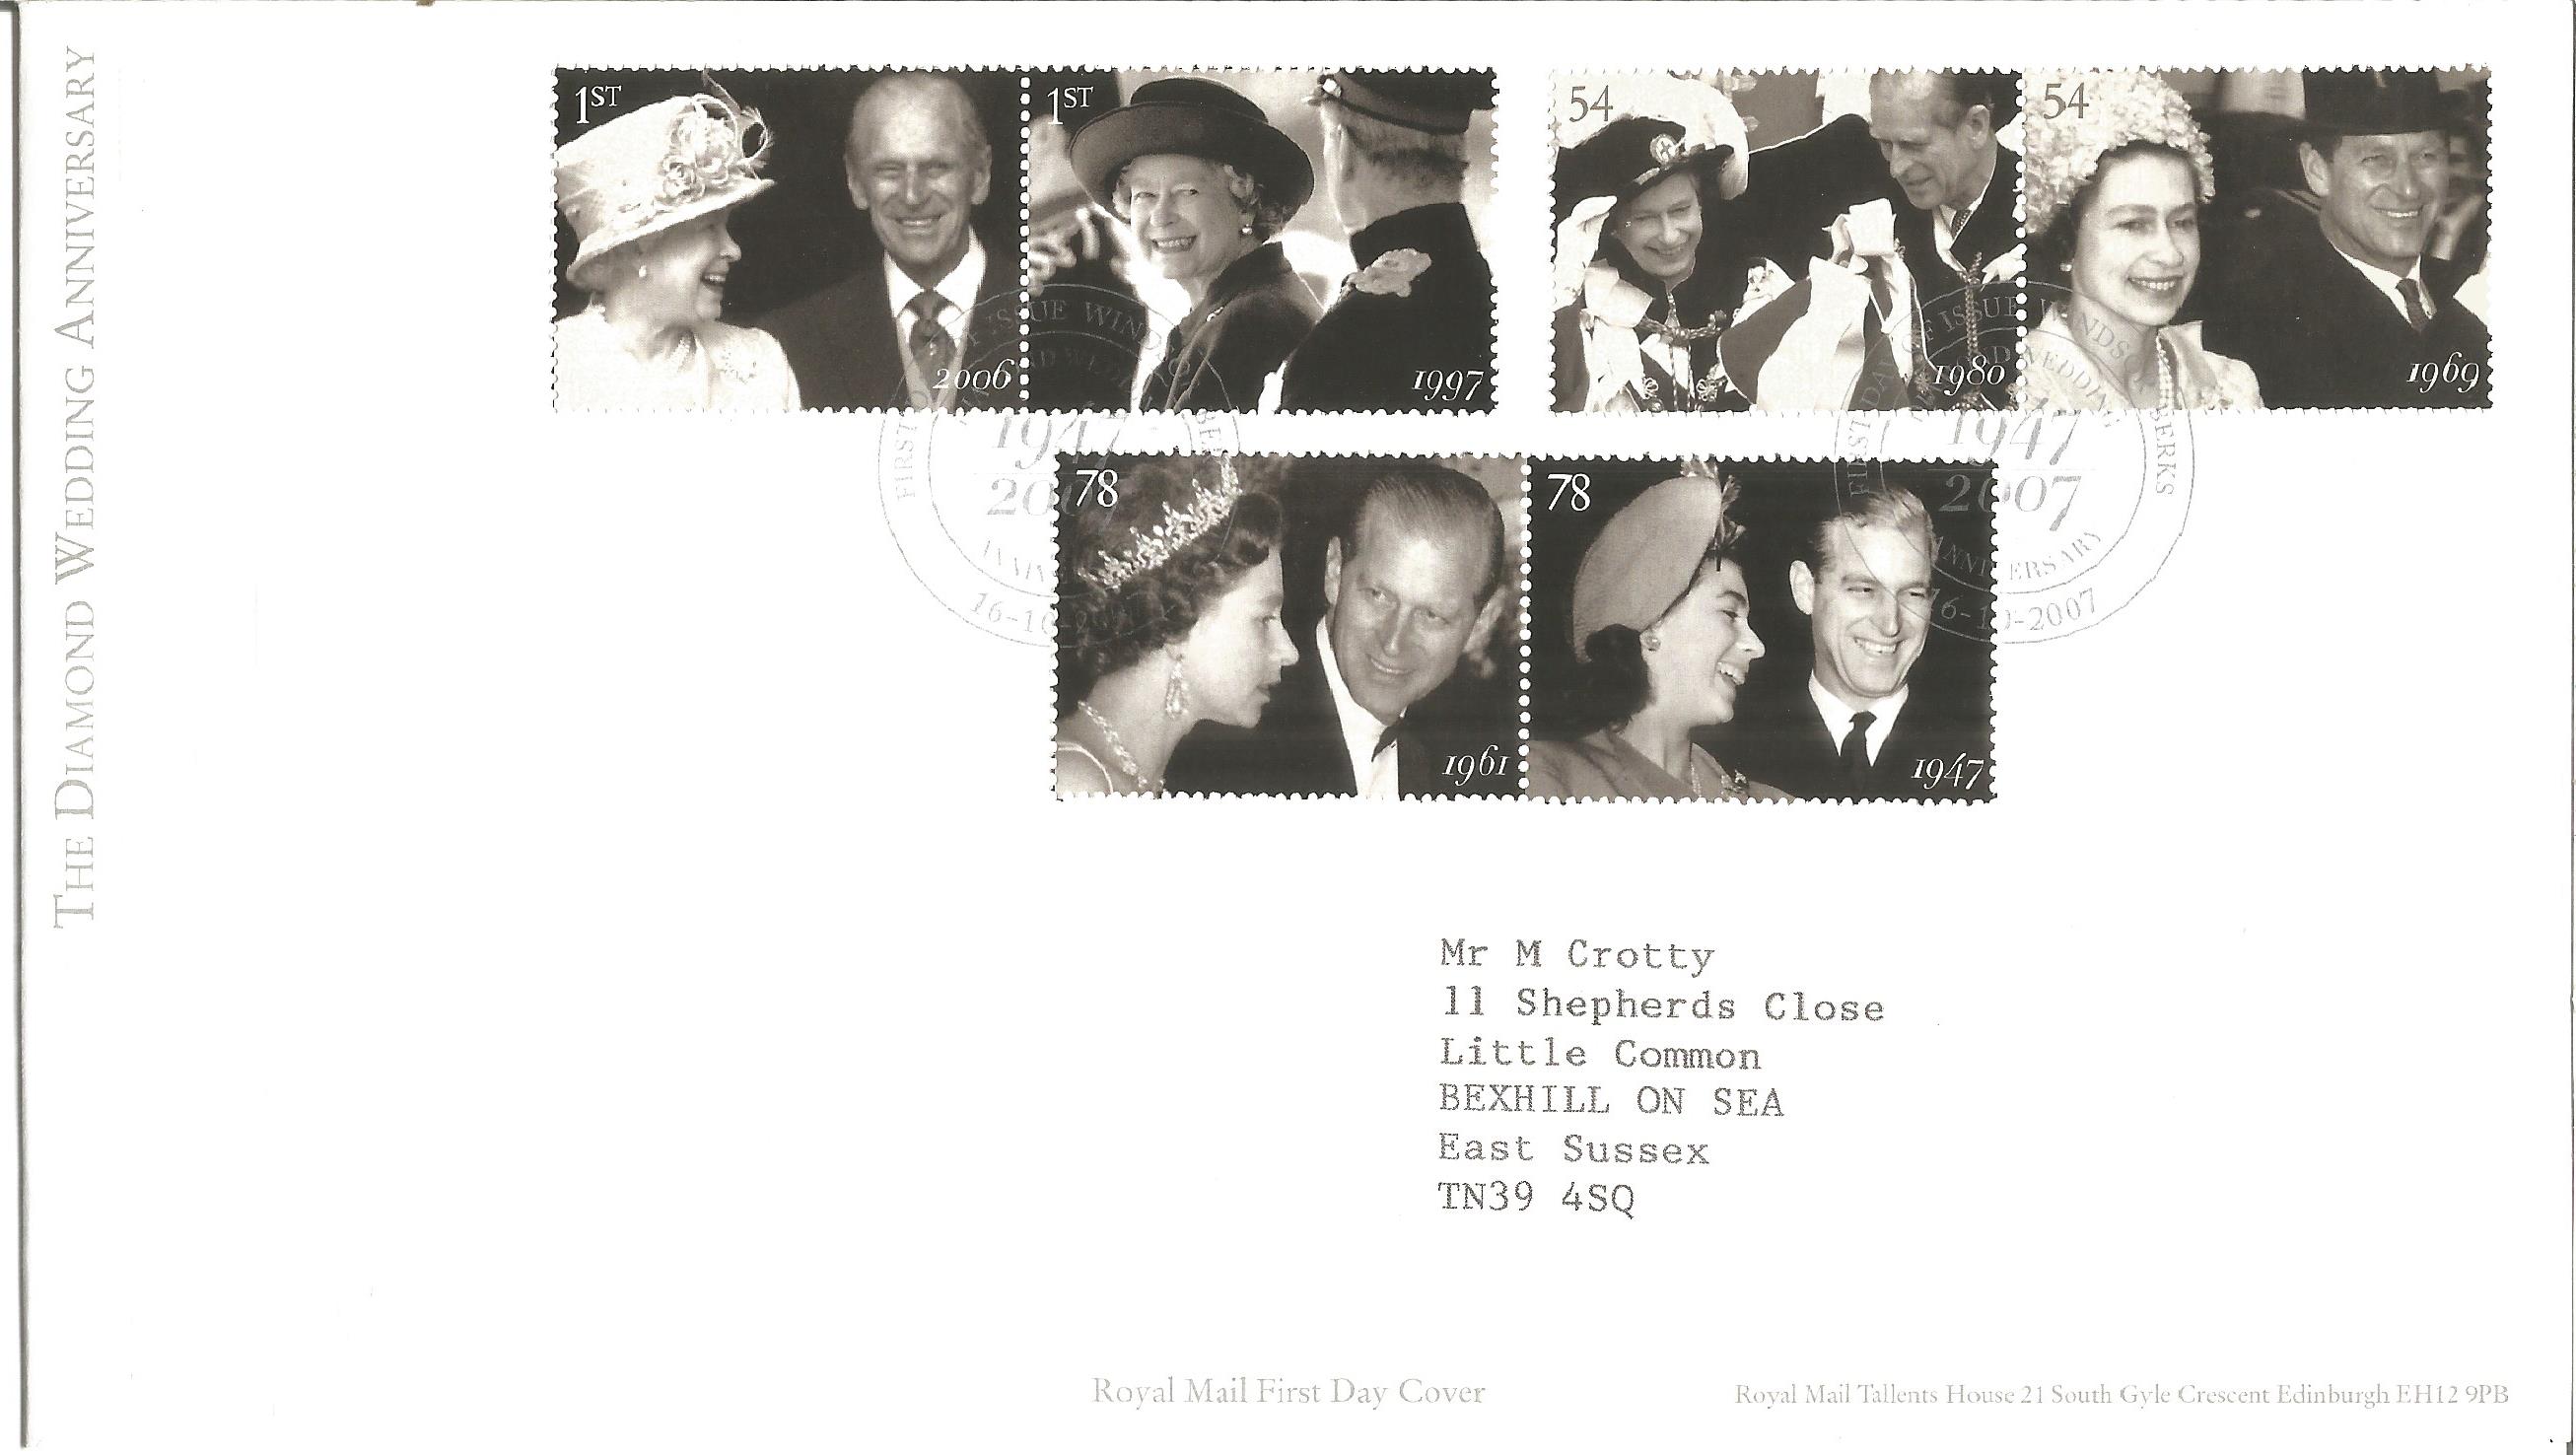 The Diamond Wedding Anniversary 1947 - 2007 unsigned FDC. Date stamp Windsor Berks 16th October